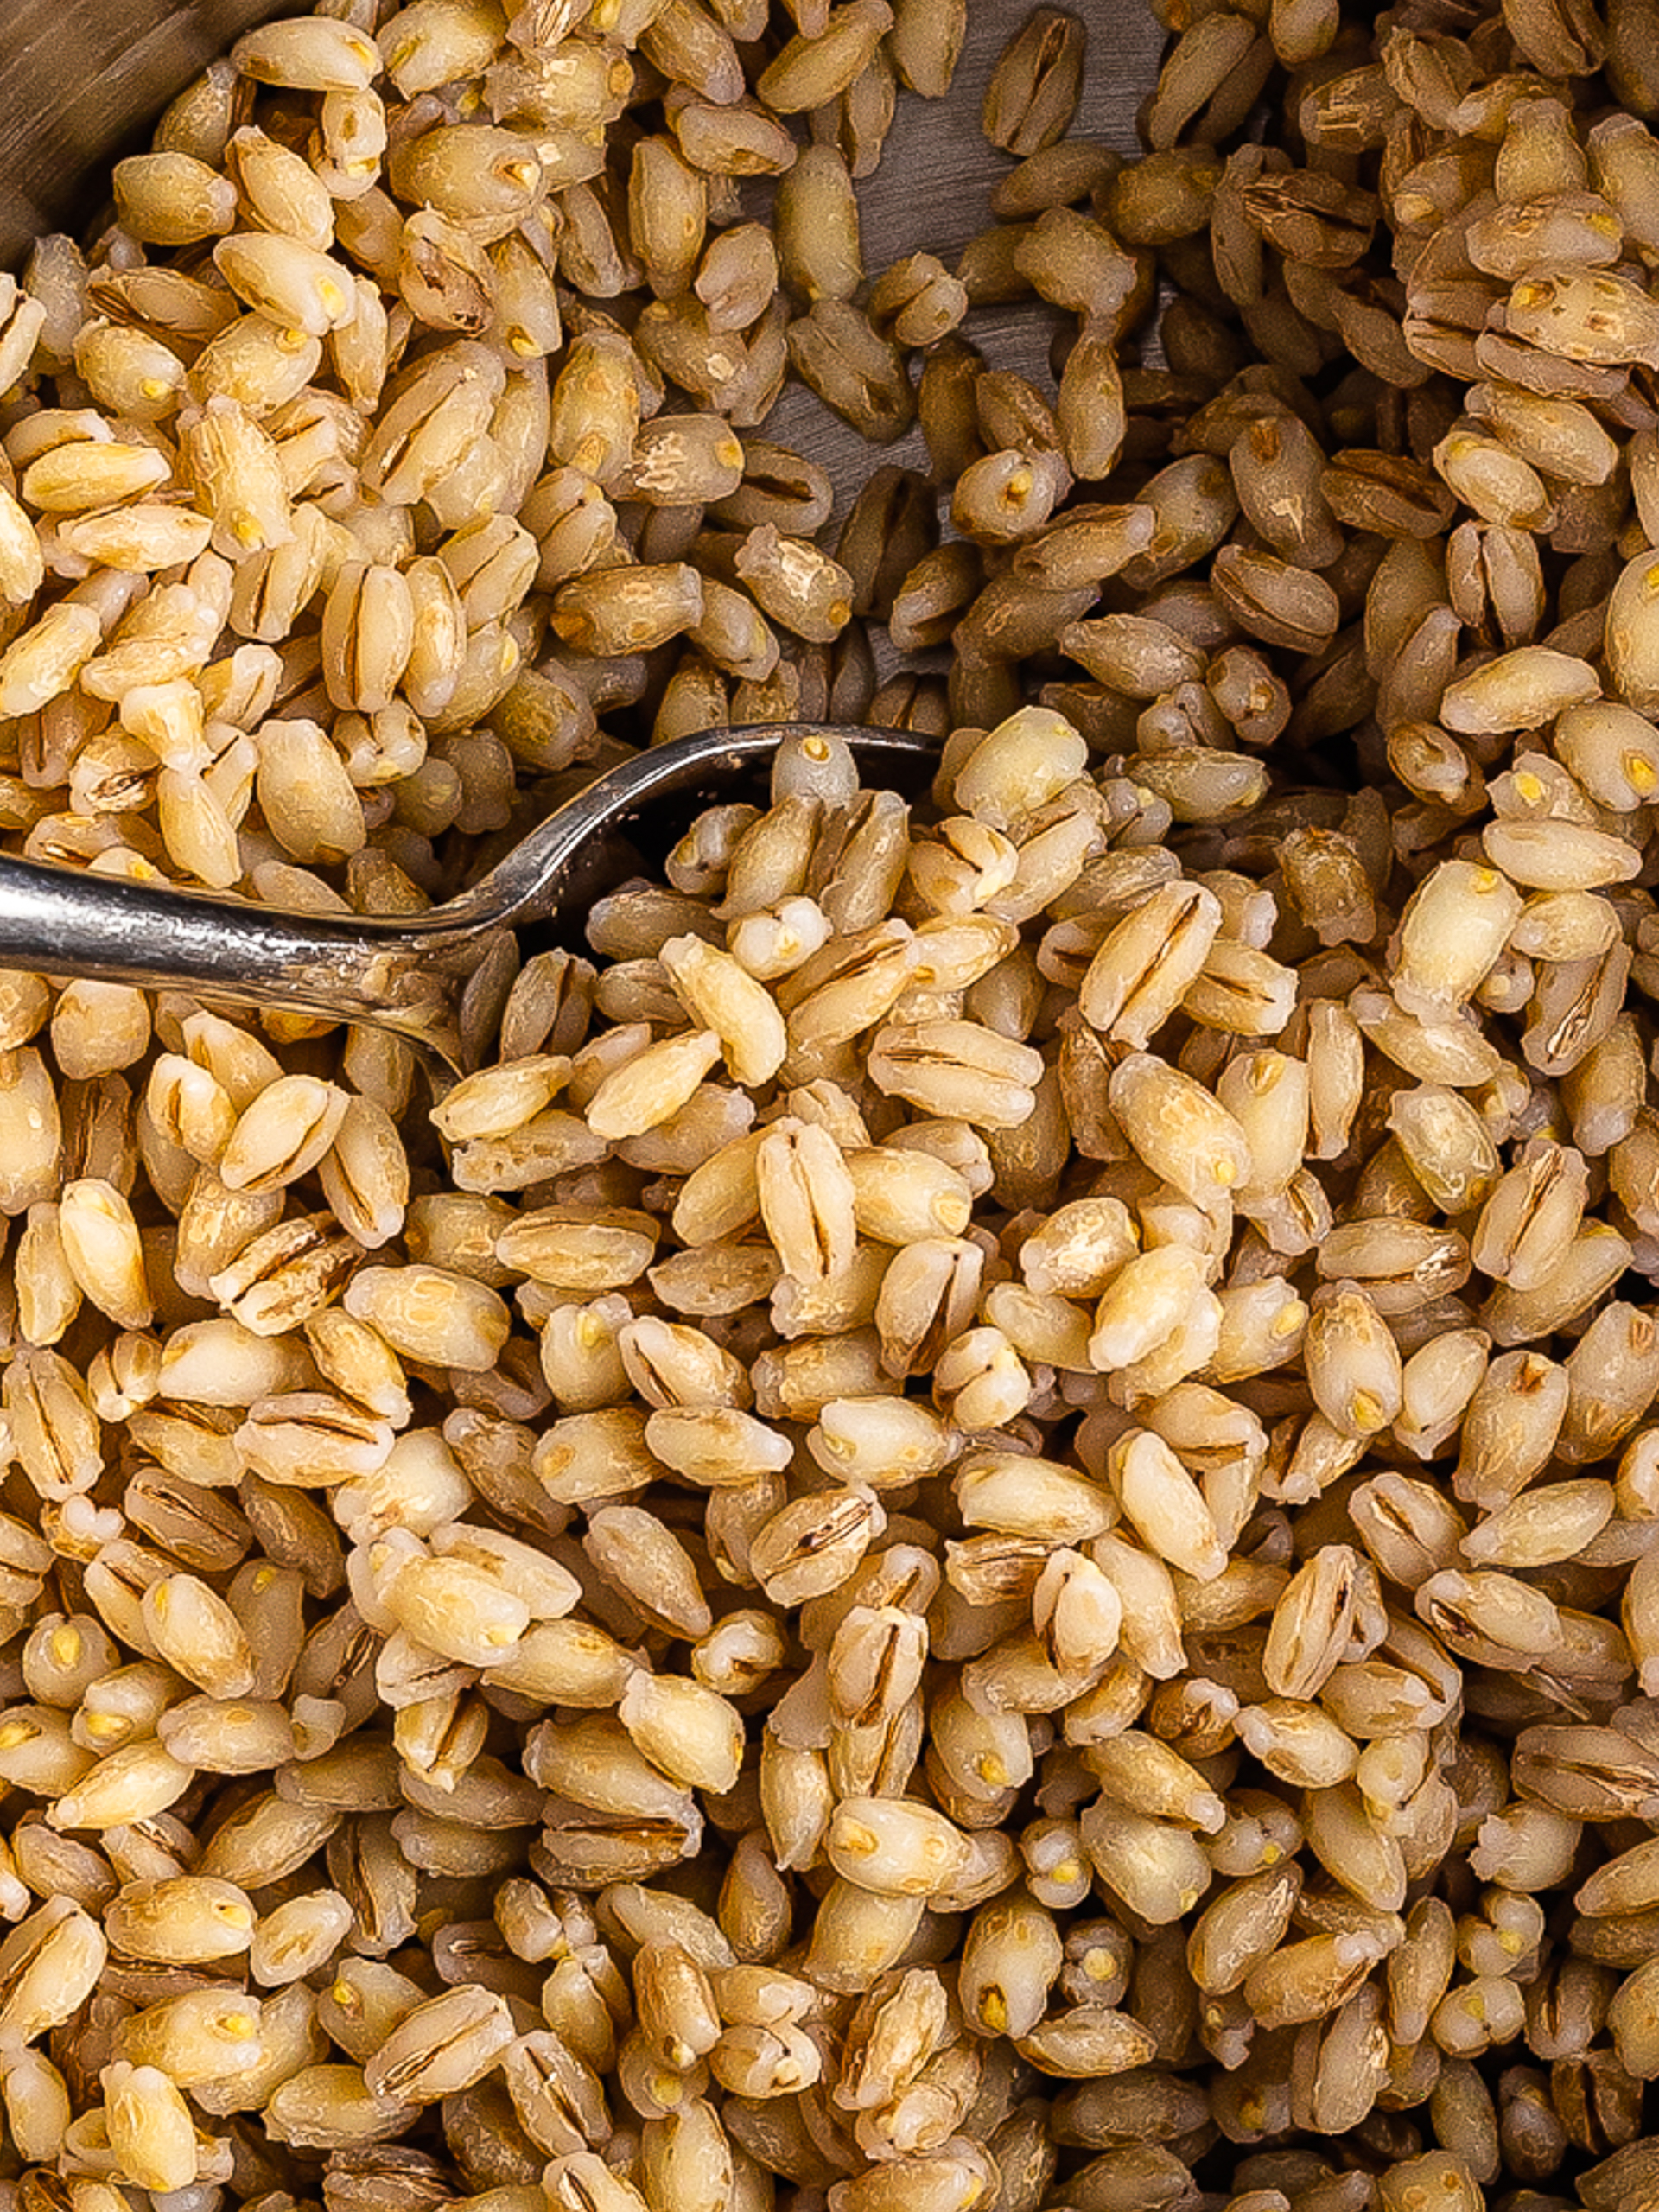 5 Health Benefits of Barley You Didn't Know About